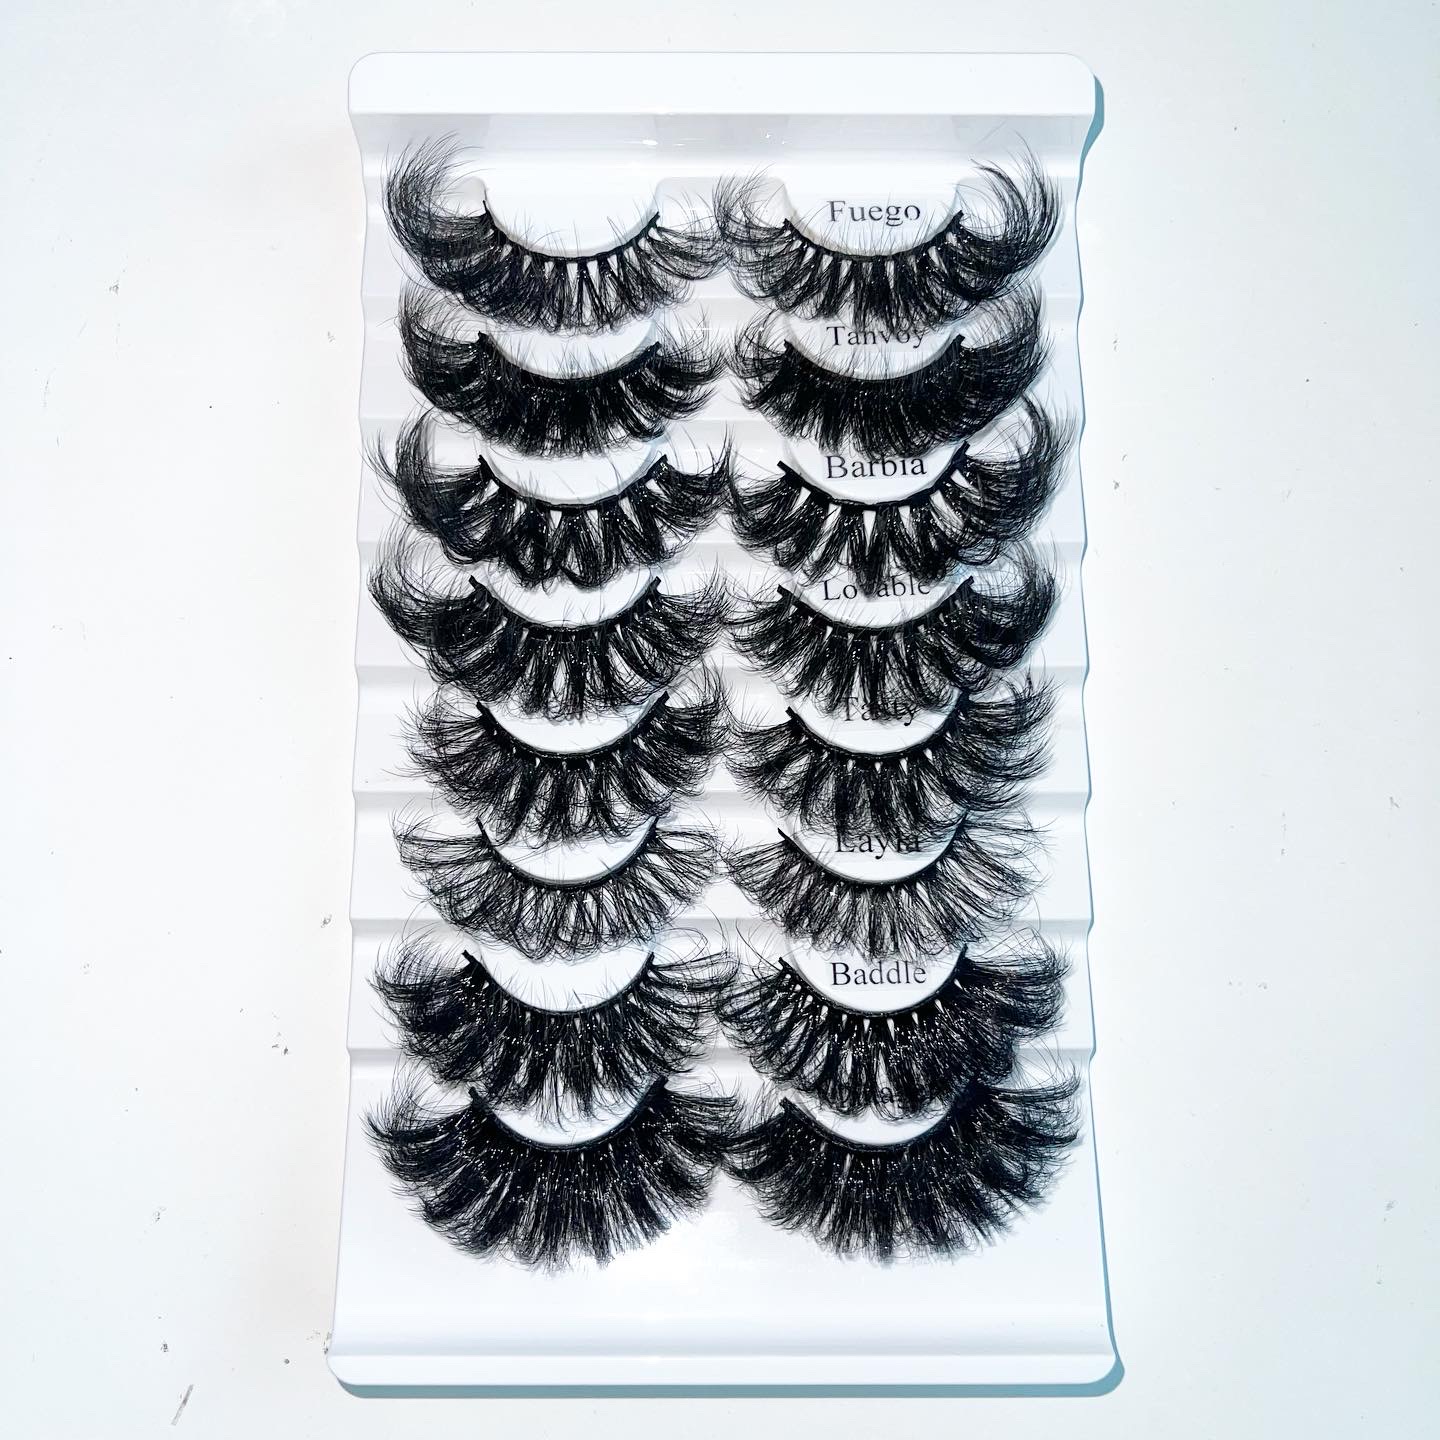 （WHOLESALE）8 PACK 25MM Russian Curl Lashes Wholesale（WHITE TRAY+CLEAR COVER:NO LOGO）(FREE DHL shipping)